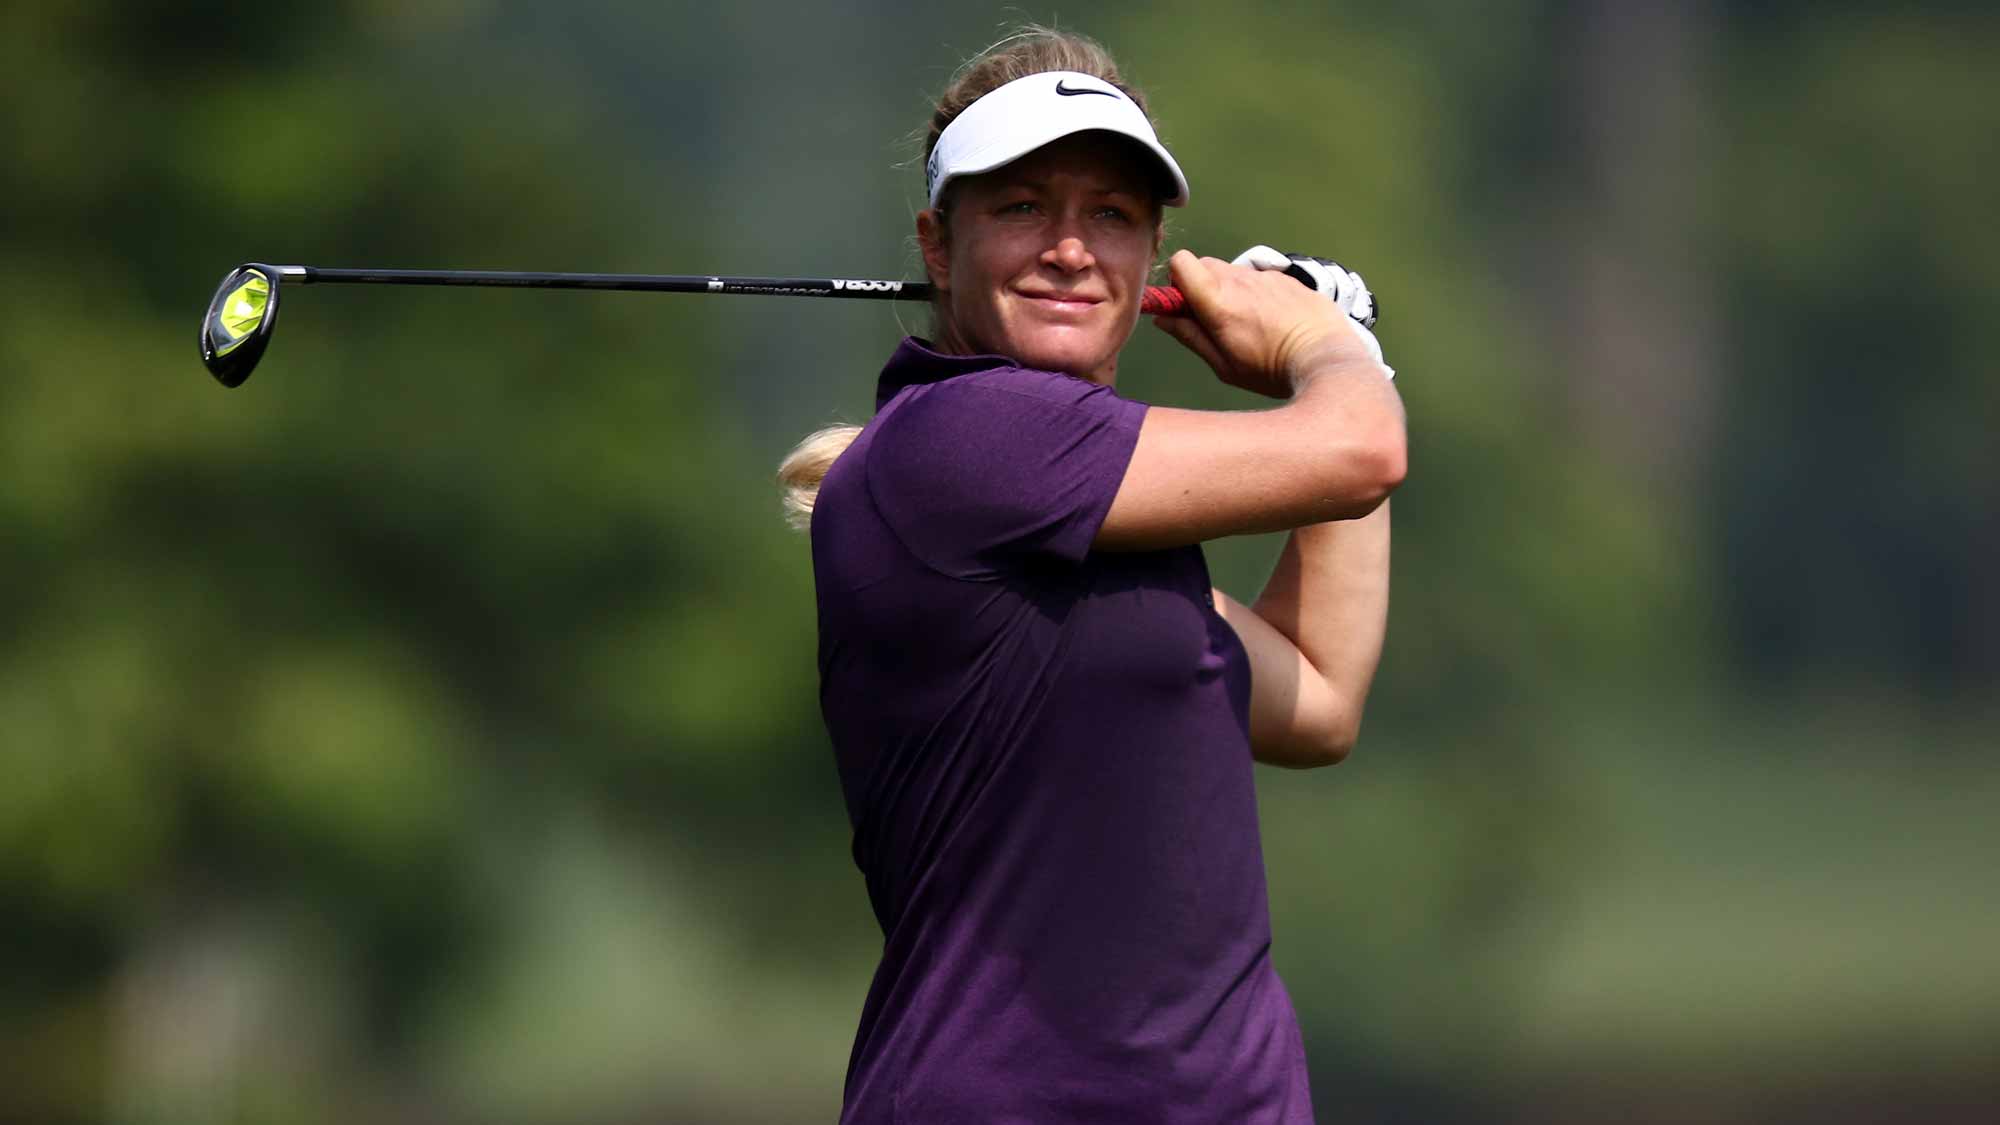 Suzann Pettersen of Norway watches her 2nd shot on the 6th hole during round one of the Sime Darby LPGA Tour at Kuala Lumpur Golf & Country Club